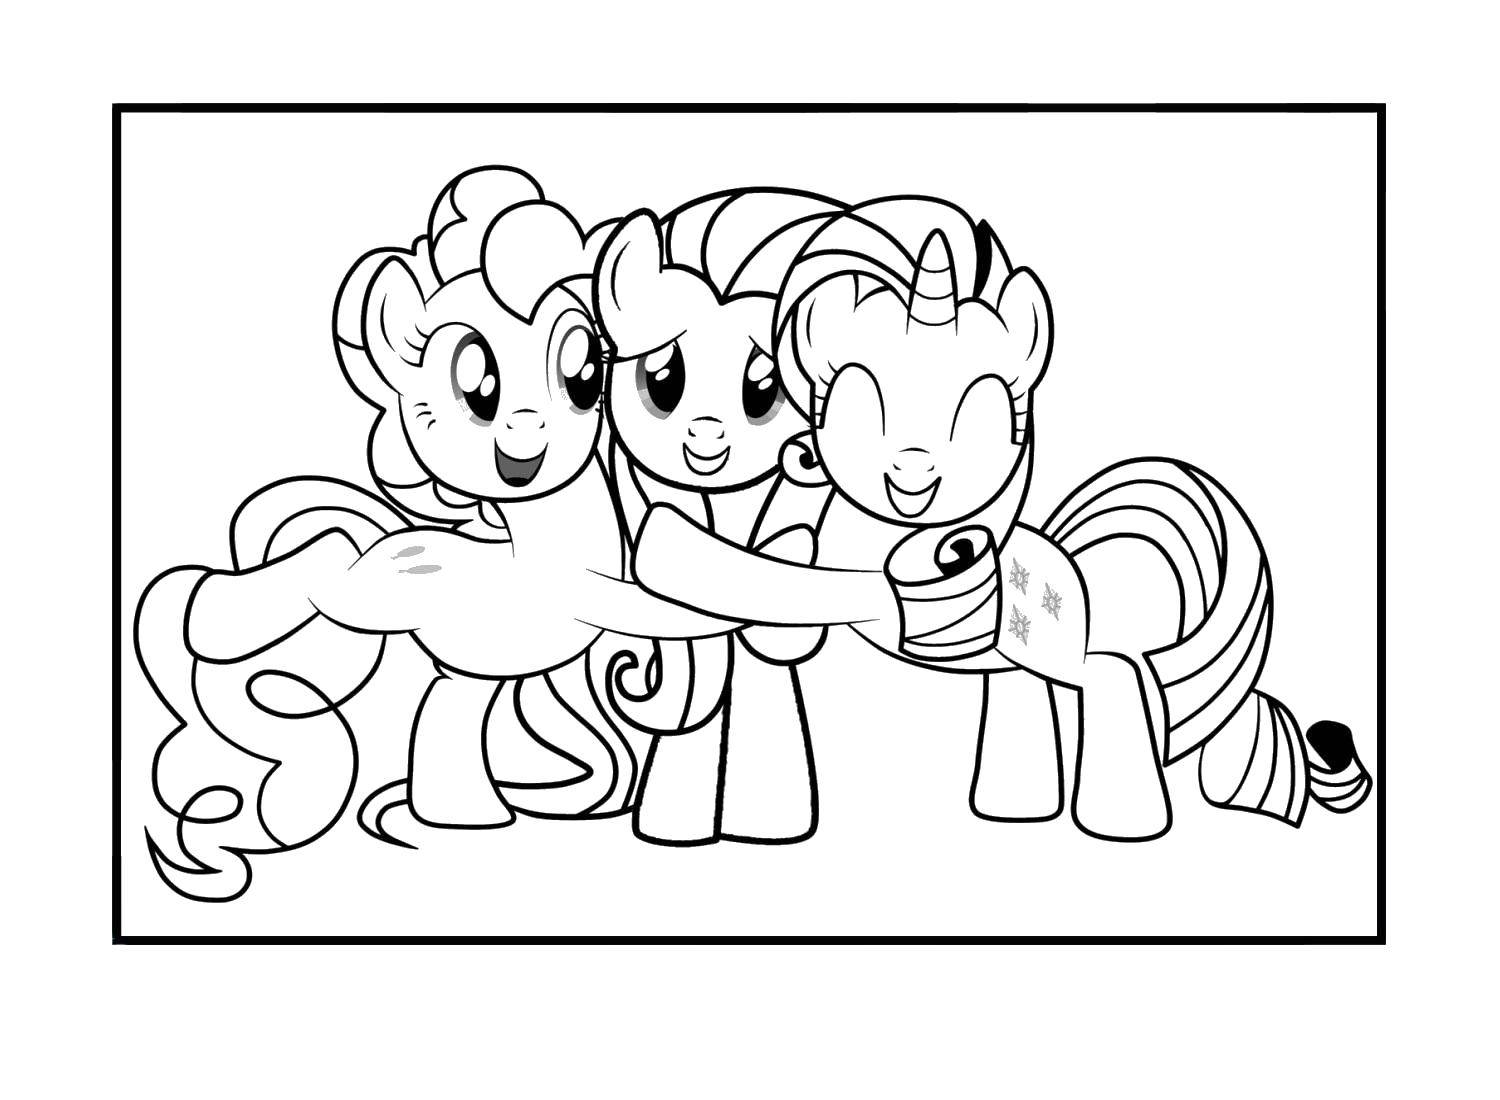 Coloring Friendly pony. Category Ponies. Tags:  Pony, My little pony.